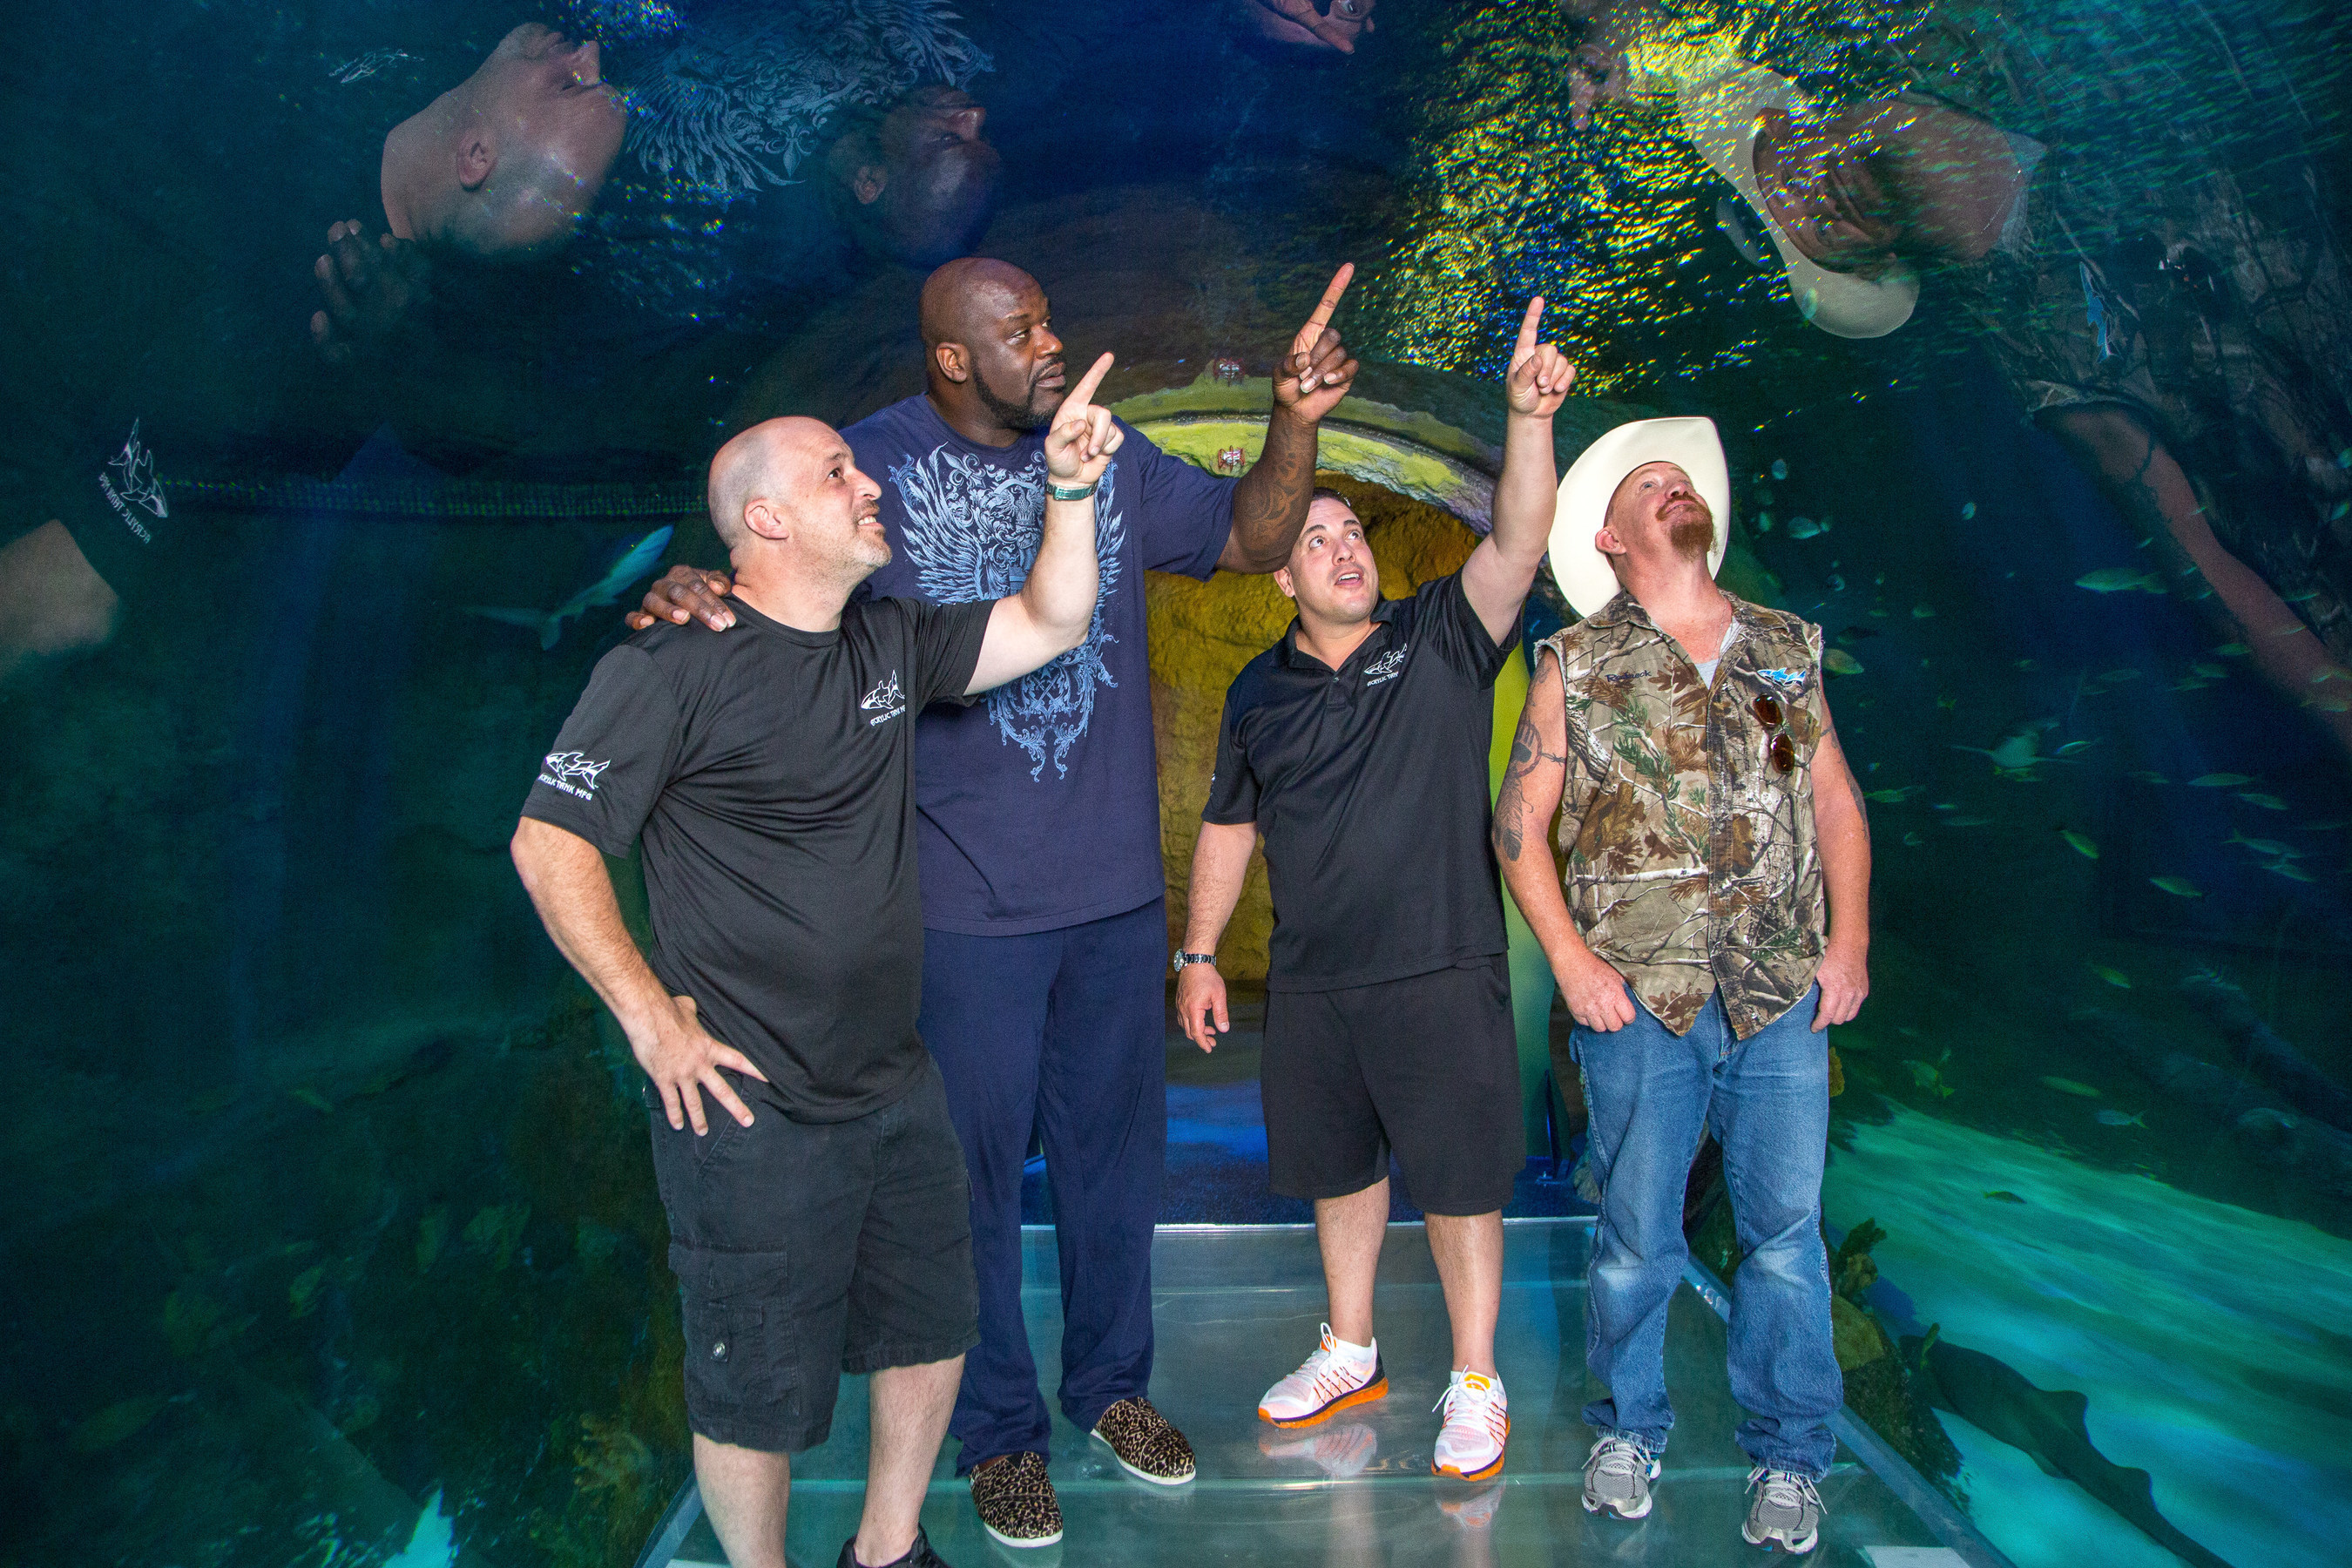 Basketball legend Shaquille O'Neal, and Animal Planet's Tanked stars, Wayde King, Brett Raymer and Redneck, visited SEA LIFE Orlando Aquarium to film the season finale of the hit series. Before finalizing the design for a new tank in Shaq's Orlando home, the group explored SEA LIFE Orlando's 360-degree walkthrough ocean tunnel, Stingray Cove and other habitats to find inspiration within Orlando's newest aquarium. Courtesy of SEA LIFE Orlando Aquarium.